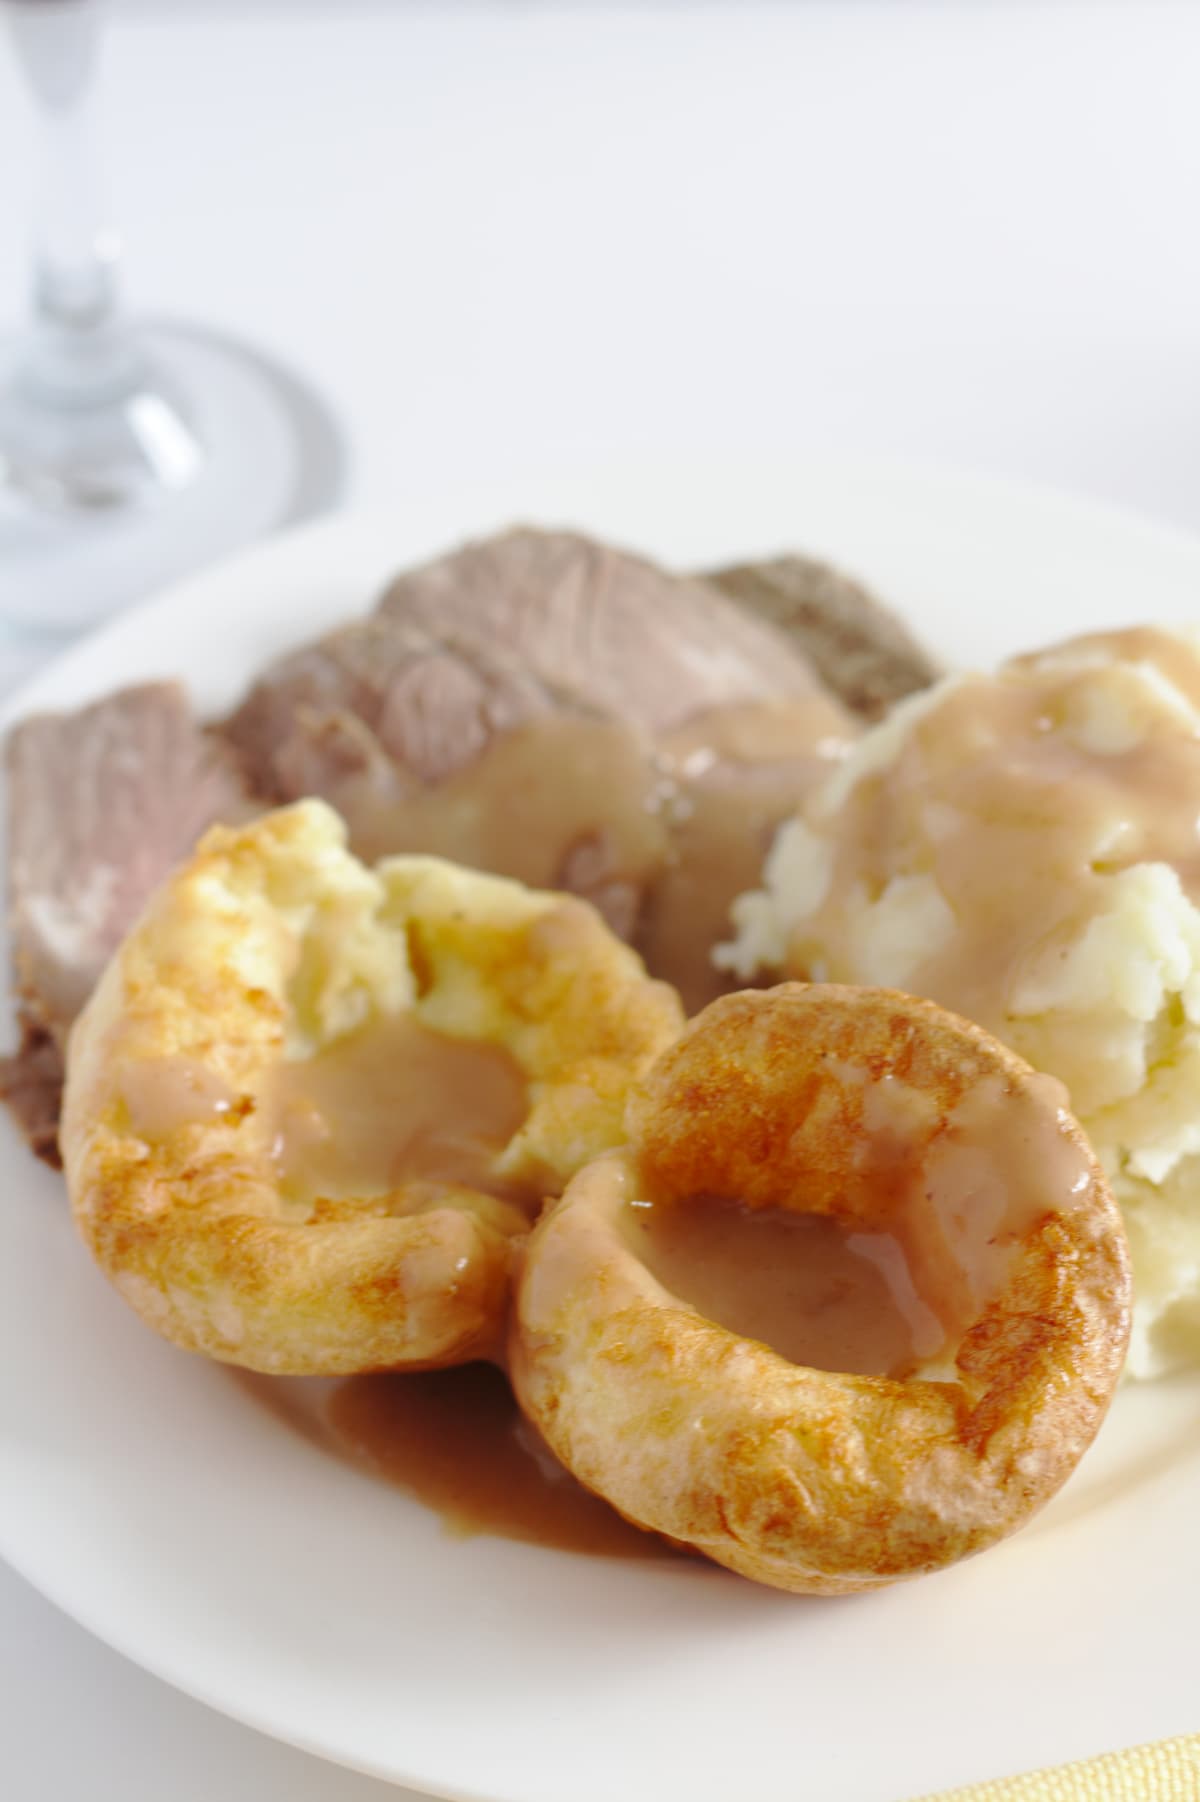 A plate of roast beef, mashed potatoes and Yorkshire pudding with a glass of red wine in the background.